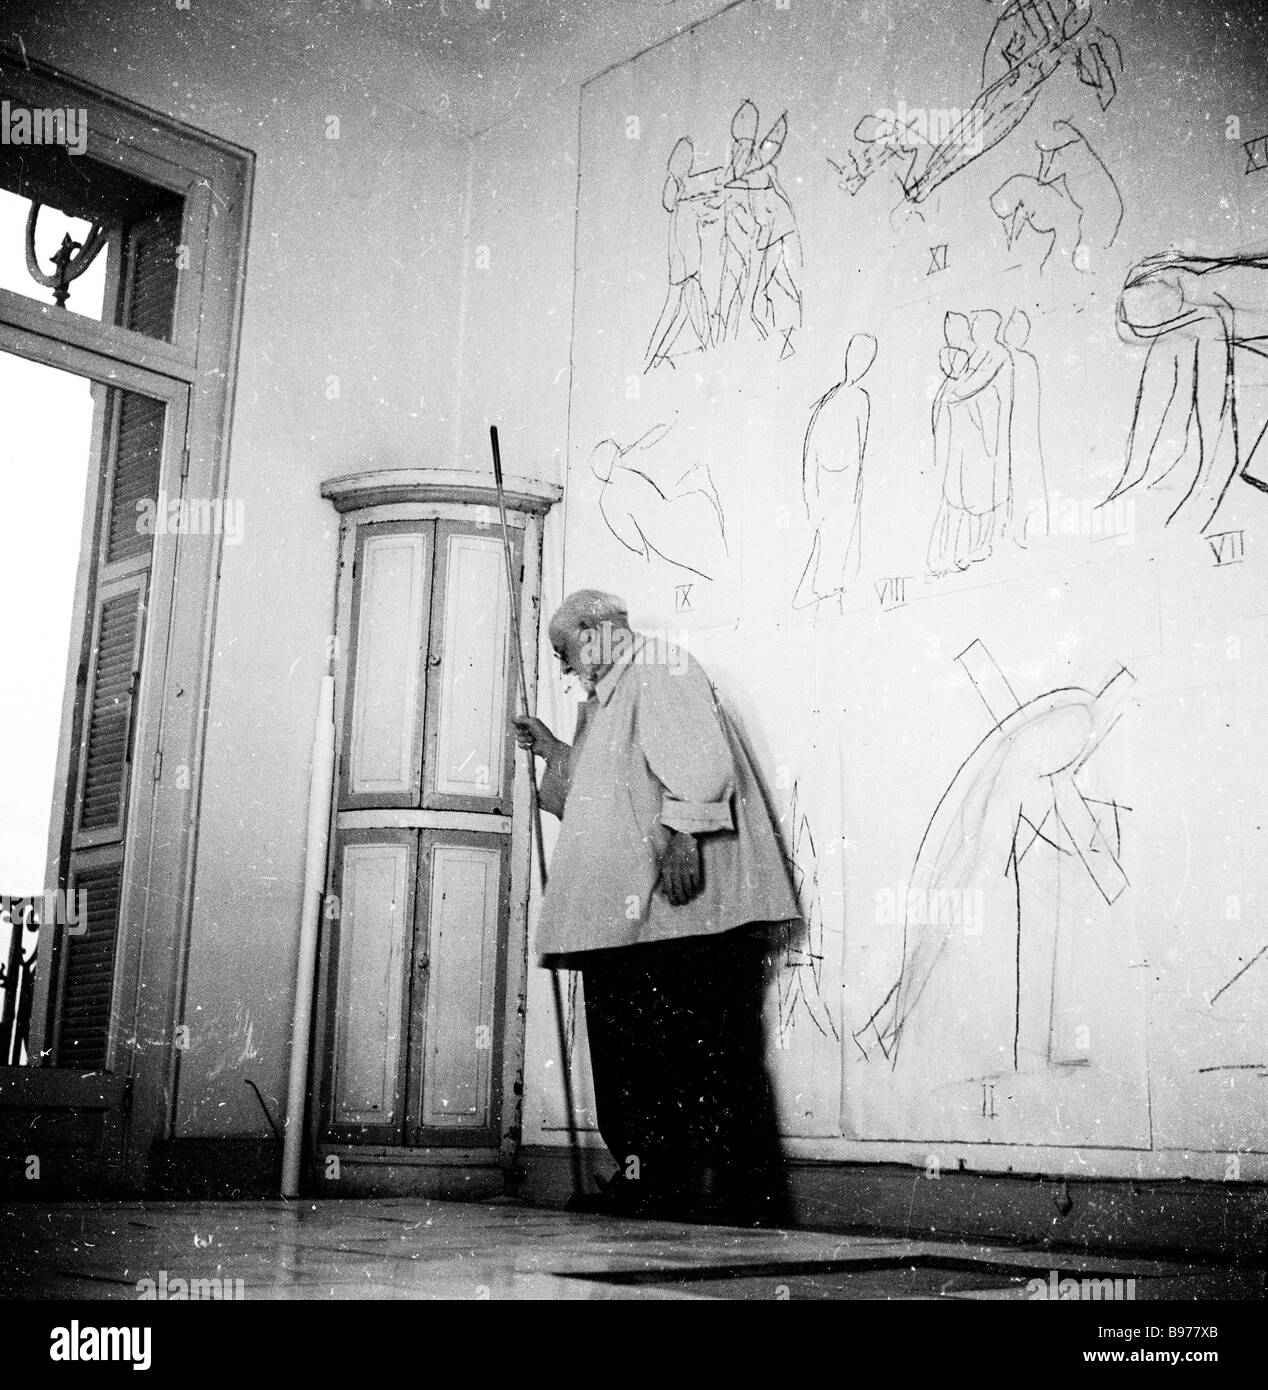 The famous French artist Henri Matisse in his studio with pole, 1951. His major project then were decorations for the Chapel of the Rosary in Vence. Stock Photo